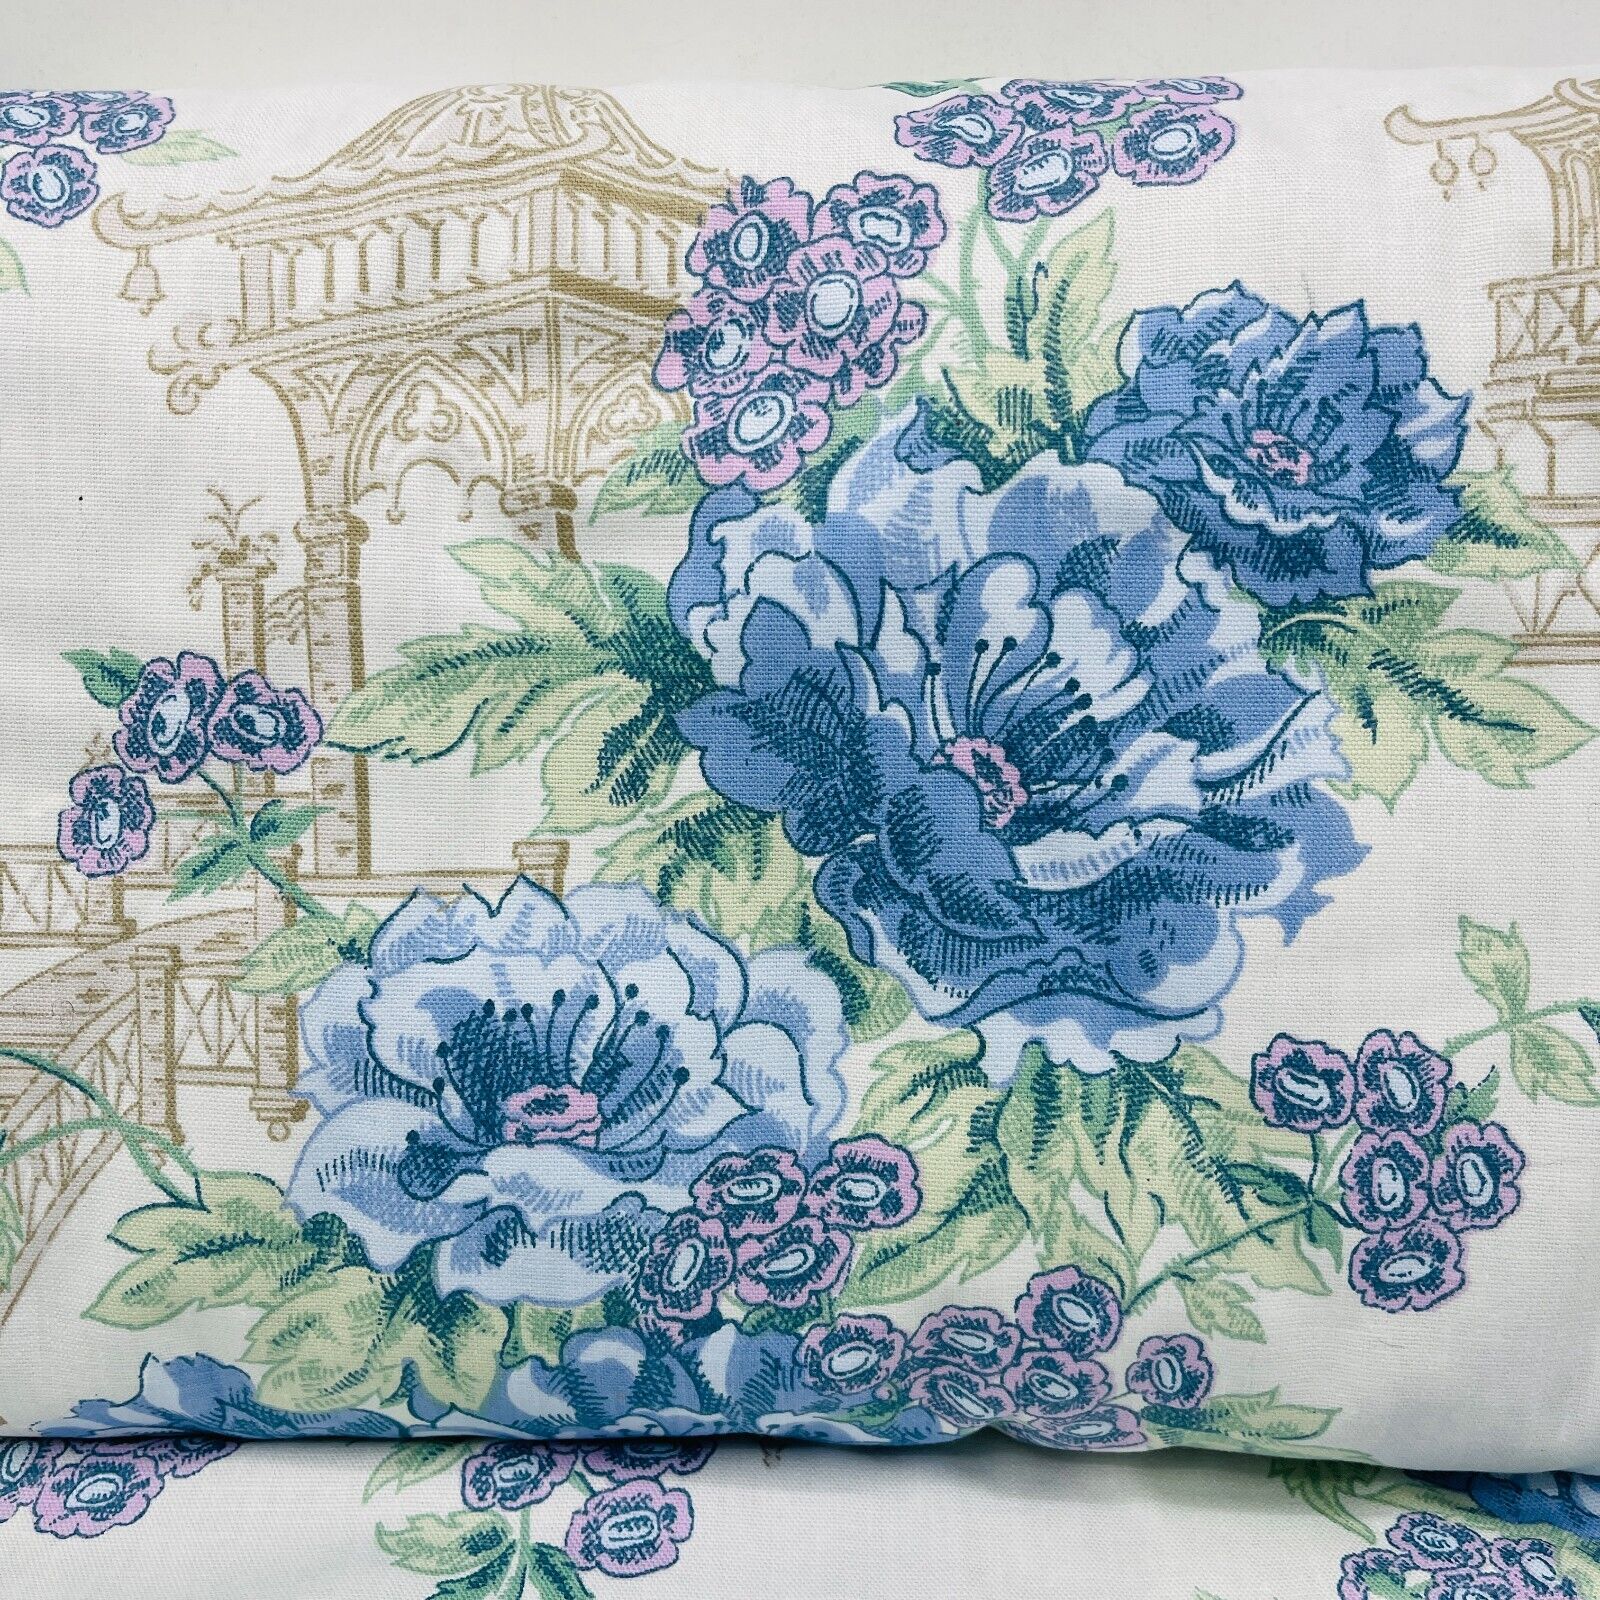 Vintage Pastel Cotton Fabric Pagoda With Flowers 23.5